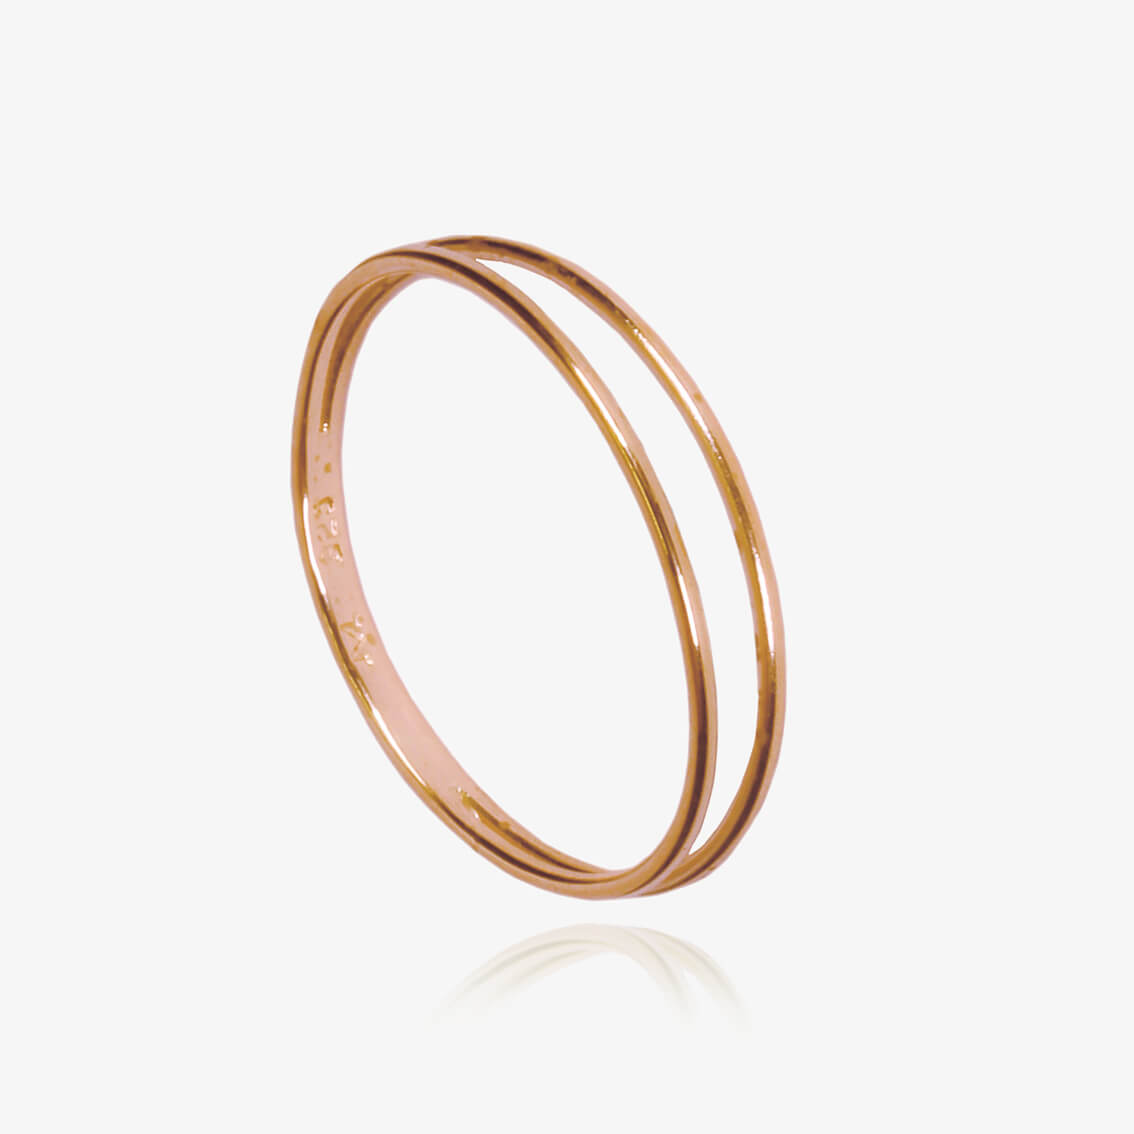 Close up of a ring with two thin bands in rose gold